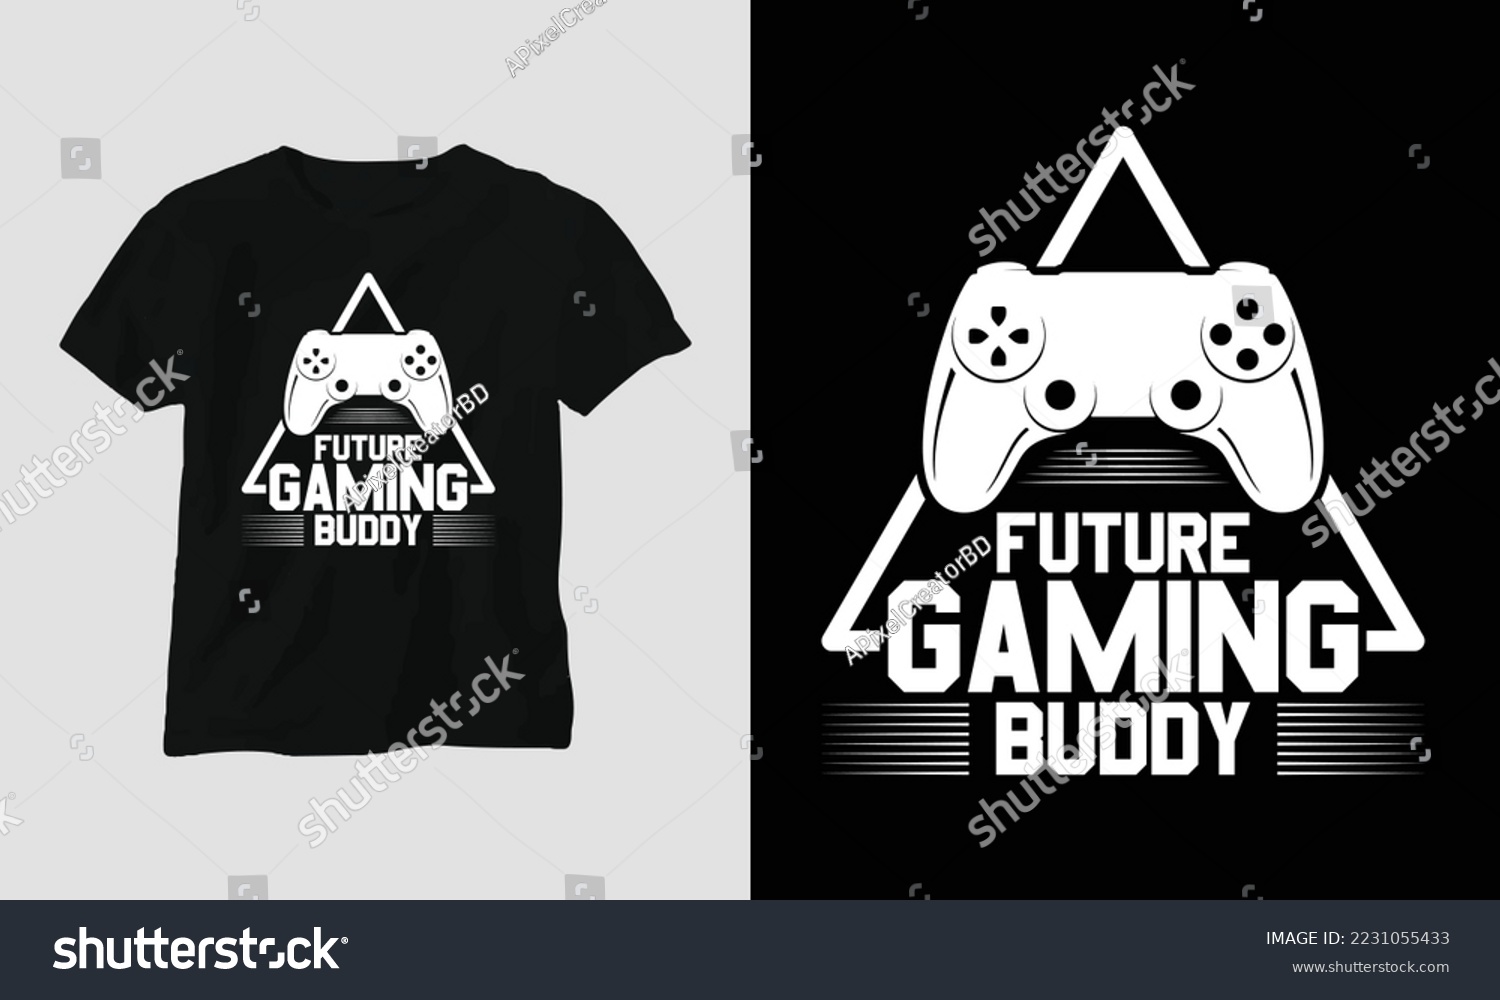 SVG of future gaming buddy - Gaming SVG T-shirt and apparel design. Vector print, typography, poster, emblem, festival, party, Black, gift, card, Craft Design, Hobby svg